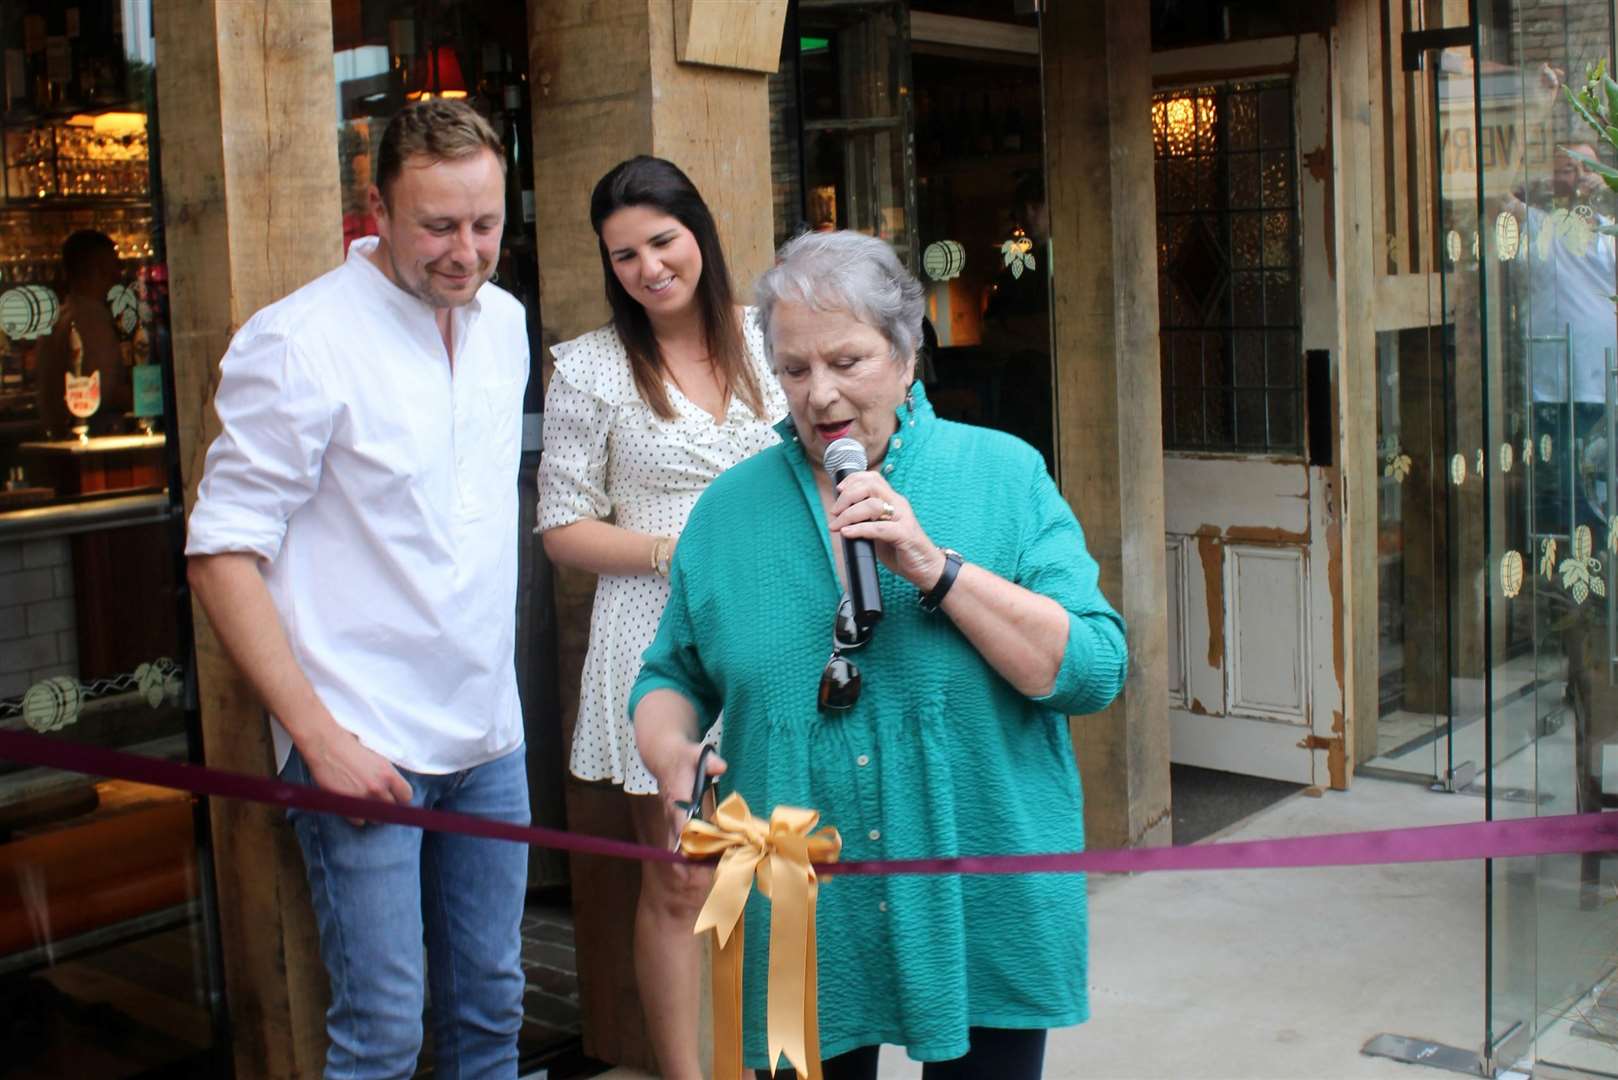 Elham resident Pam Ferris officially opens The Kings Arms with Contemporary Pubs managing director Will Sheldon and his wife Nadine. Picture: The Kings Arms